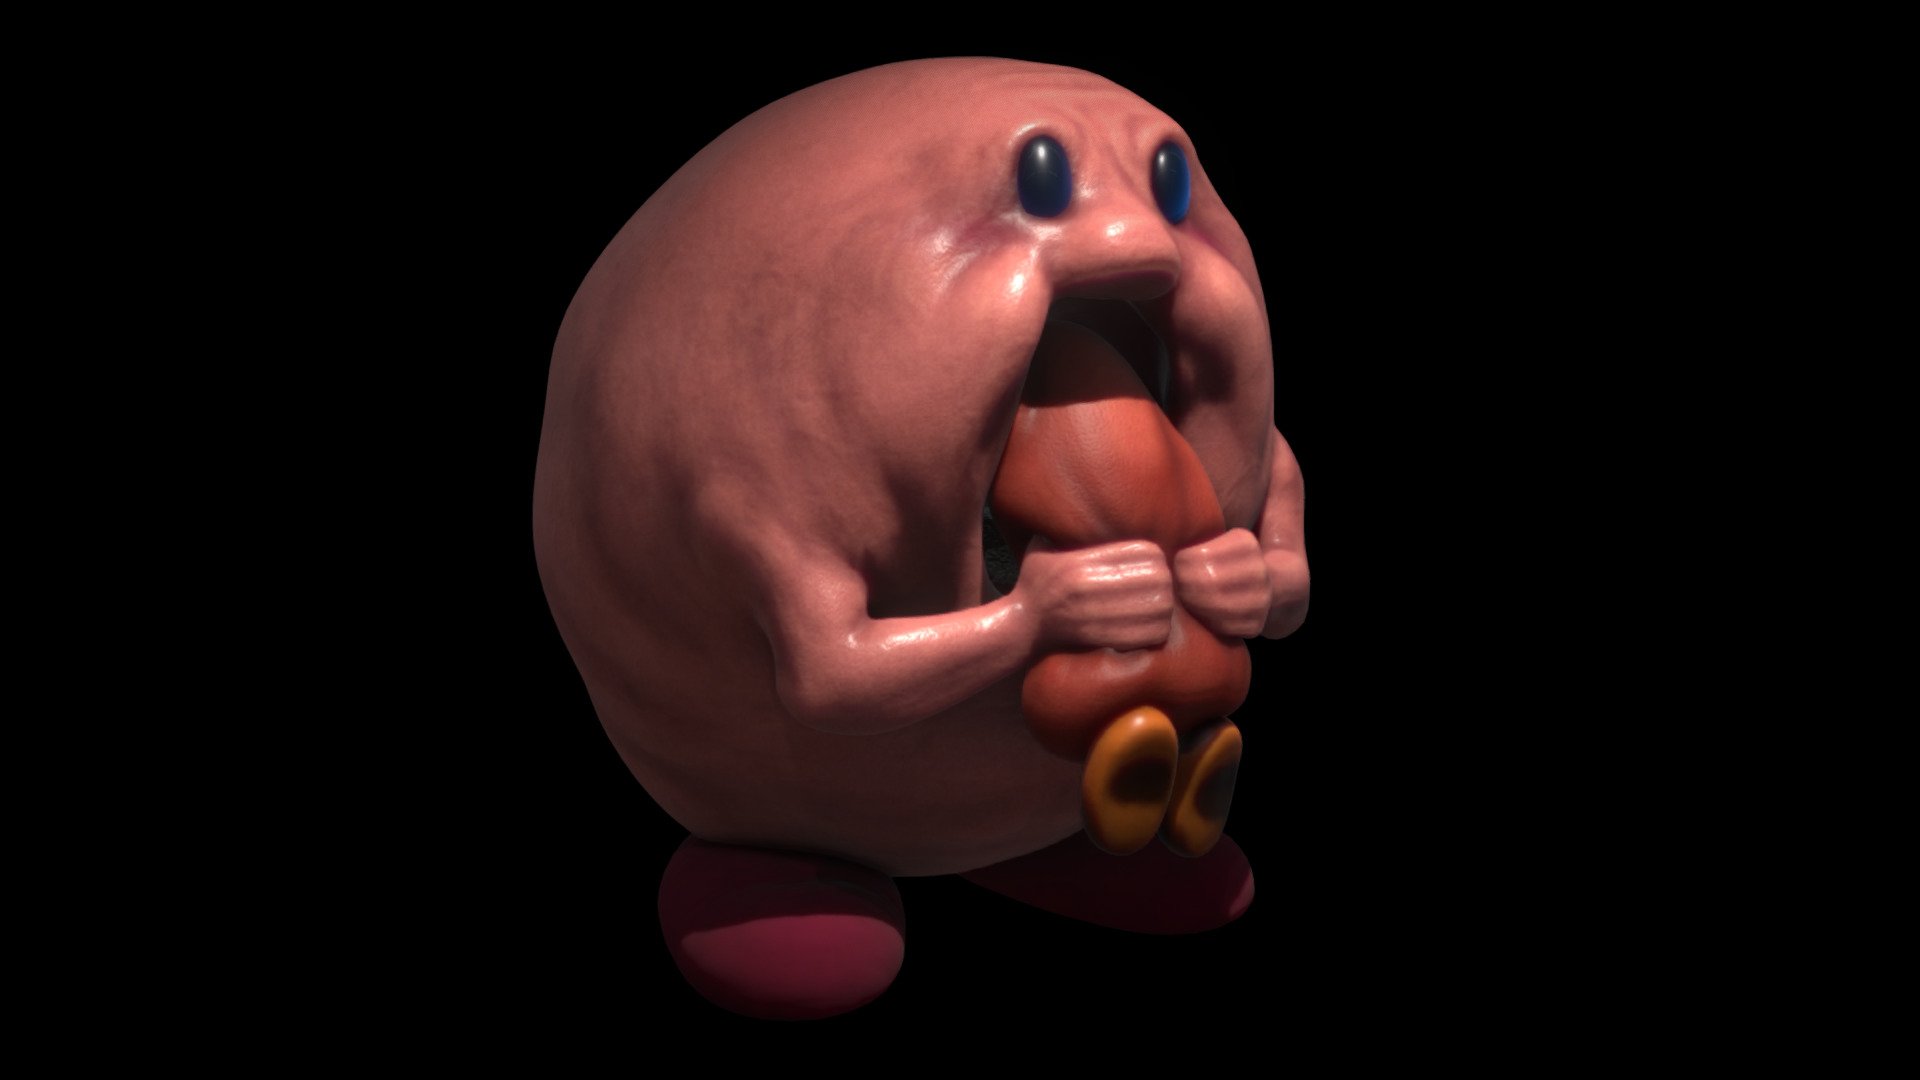 Based on https://twitter.com/sakkan69/status/910844603275685888

Made for a school assignment - Kirby Devours Waddle Dee - 3D model by LordOfTurtles 3d model